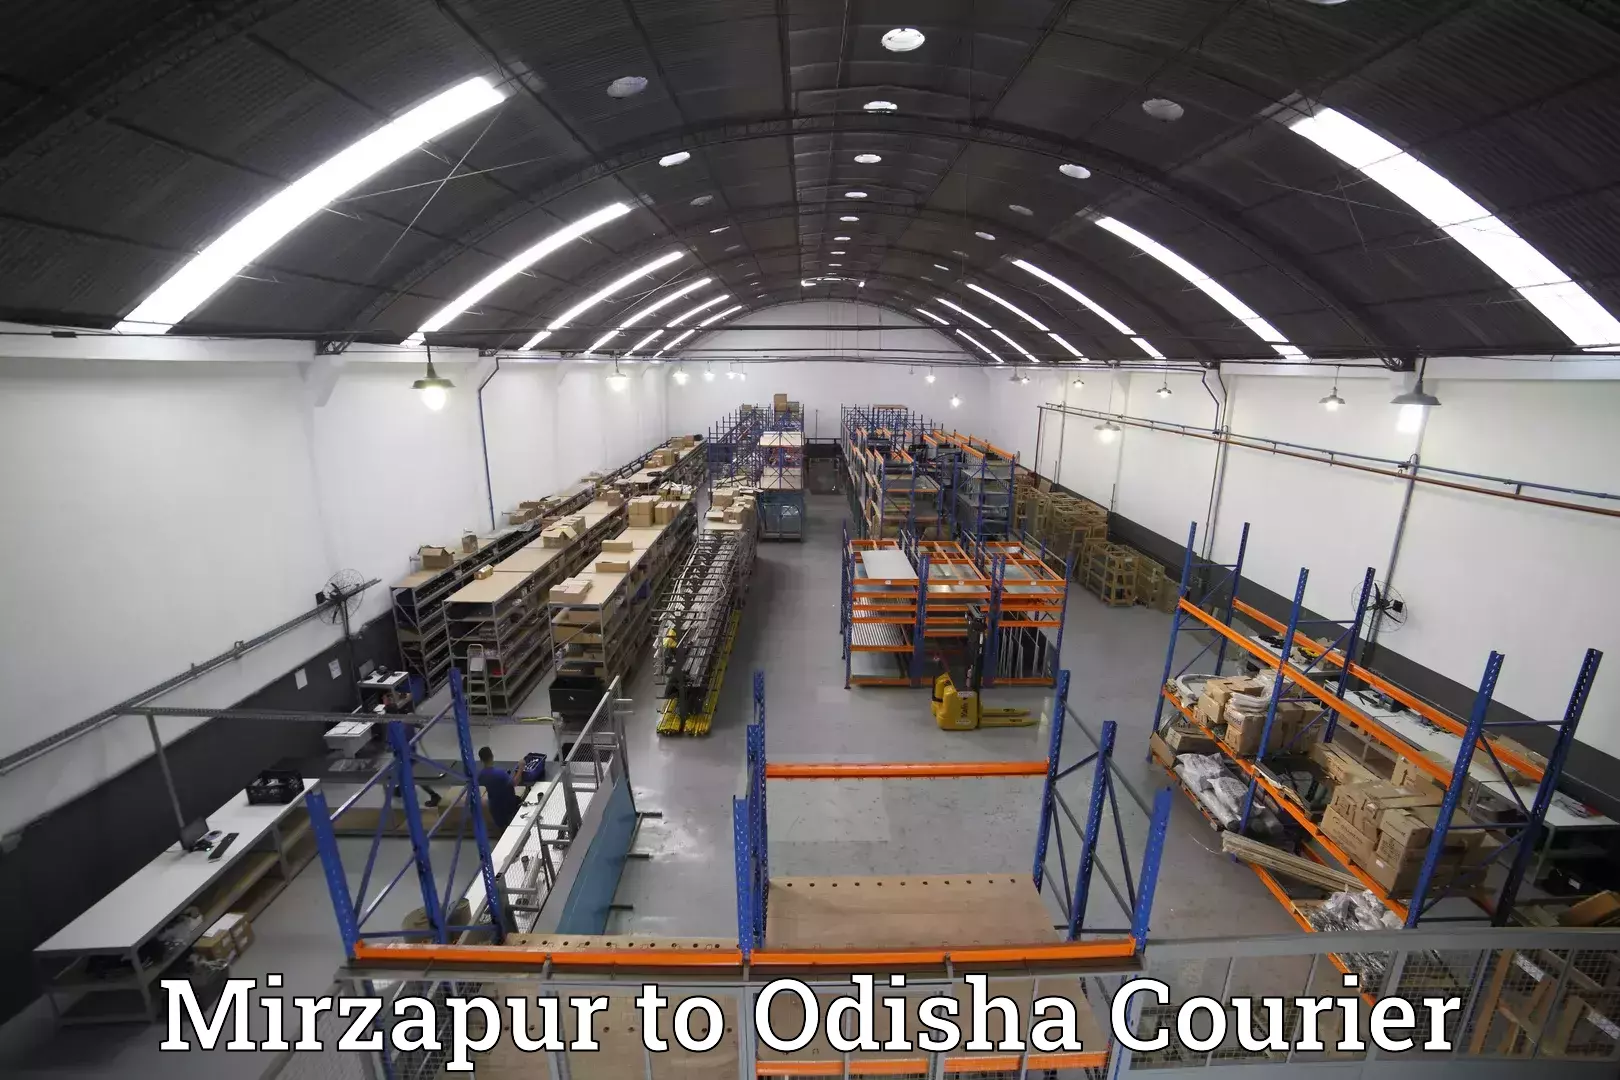 Luggage shipment specialists in Mirzapur to Odisha